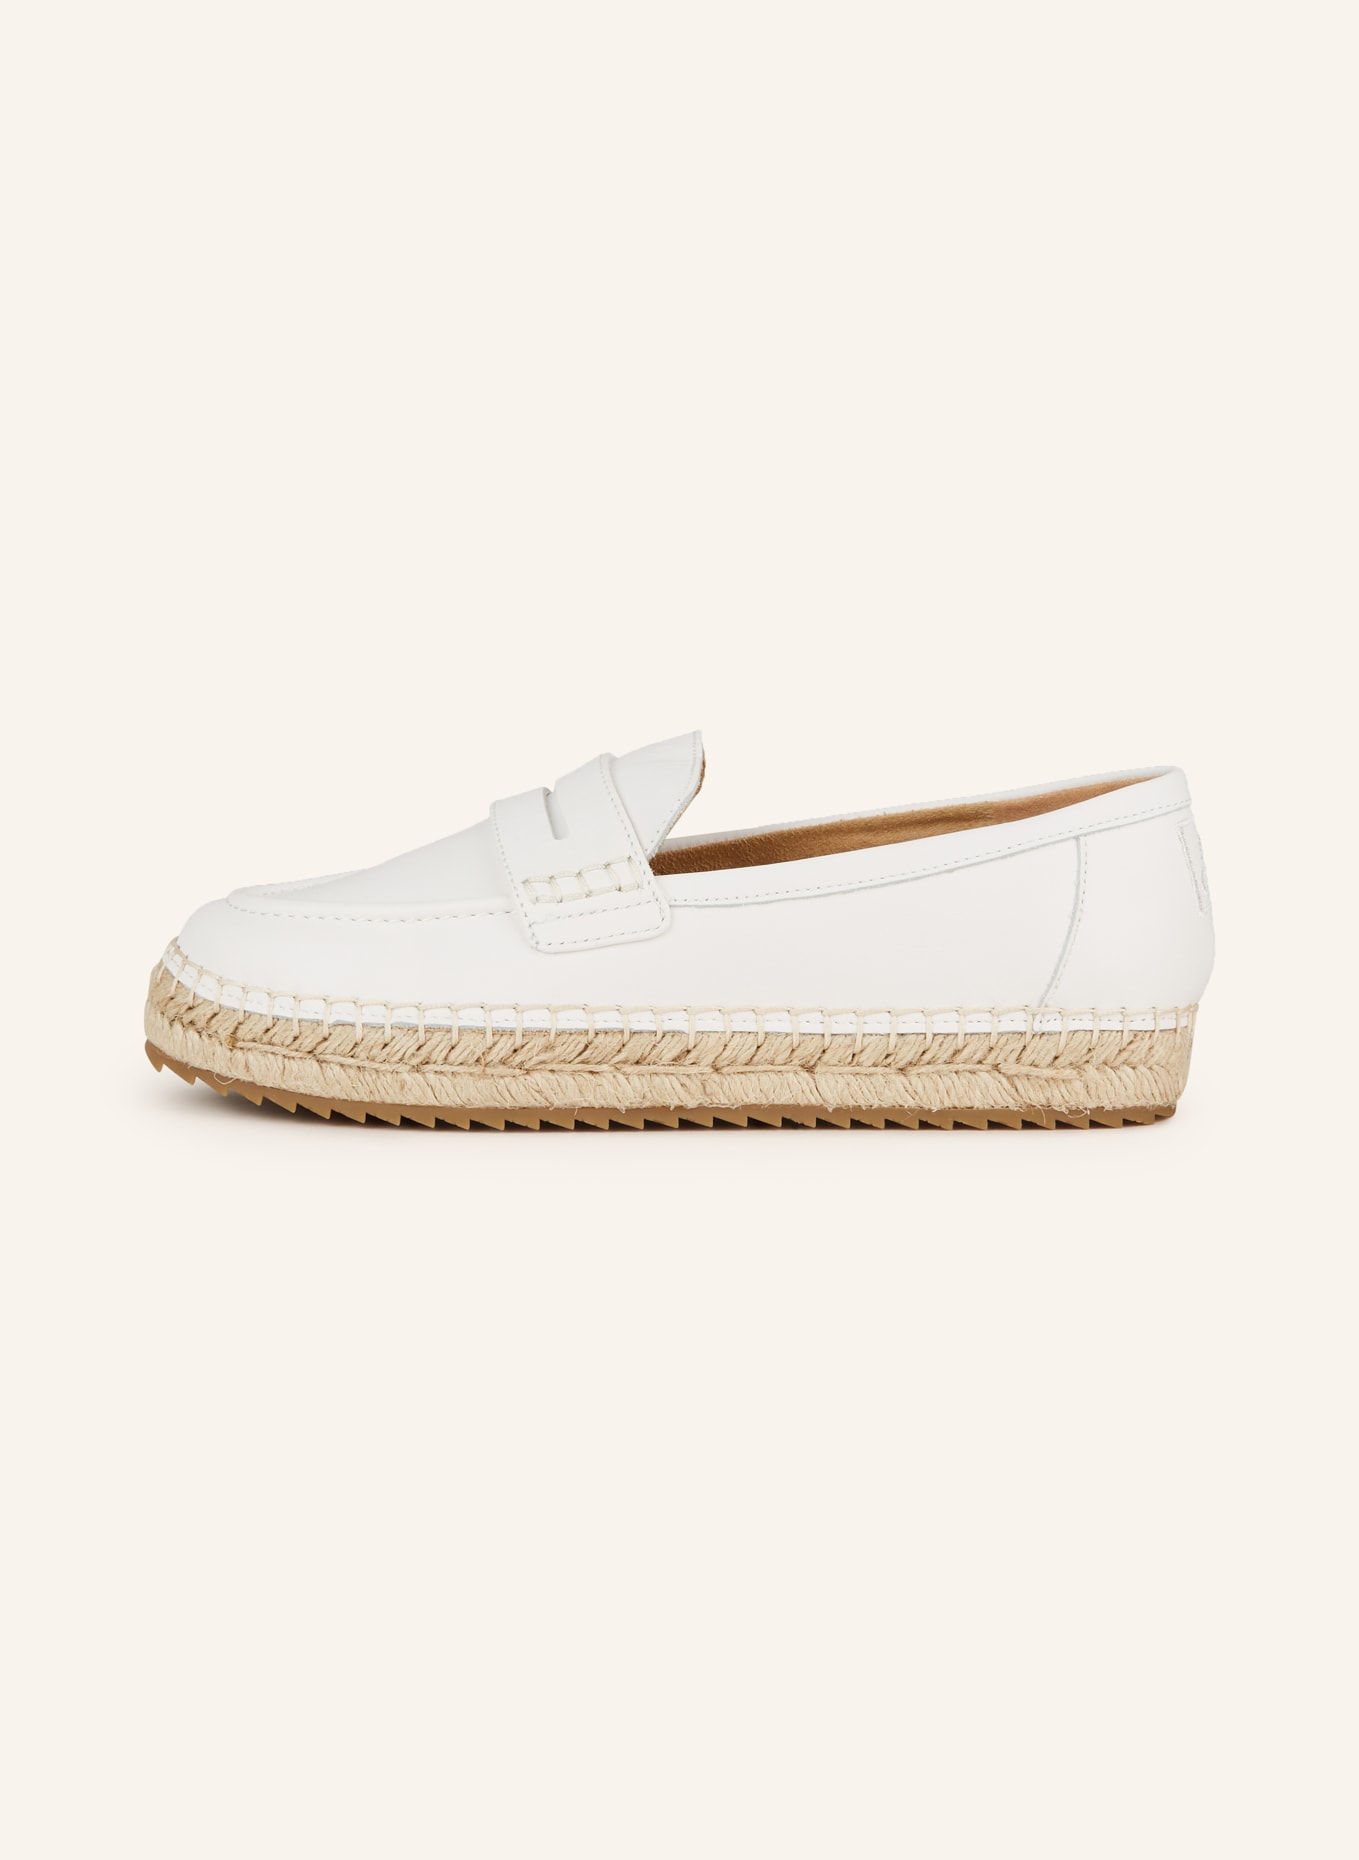 Marc O'Polo Penny-Loafer, Farbe: WEISS (Bild 4)